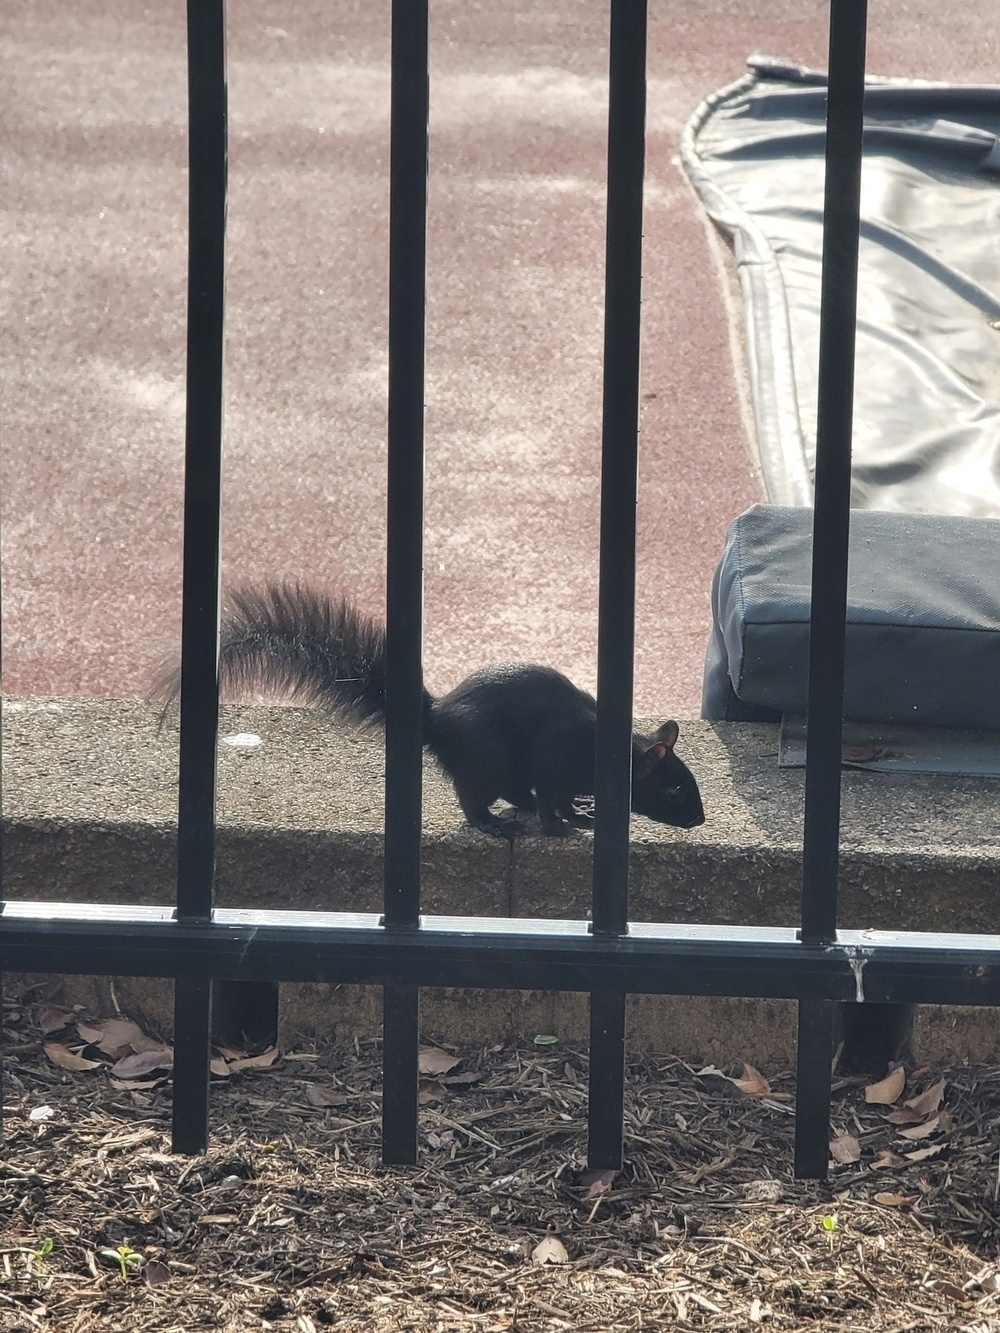 profile view of a black squirrel with the tail on the left and the head on the right. behind black wrought iron fence bars